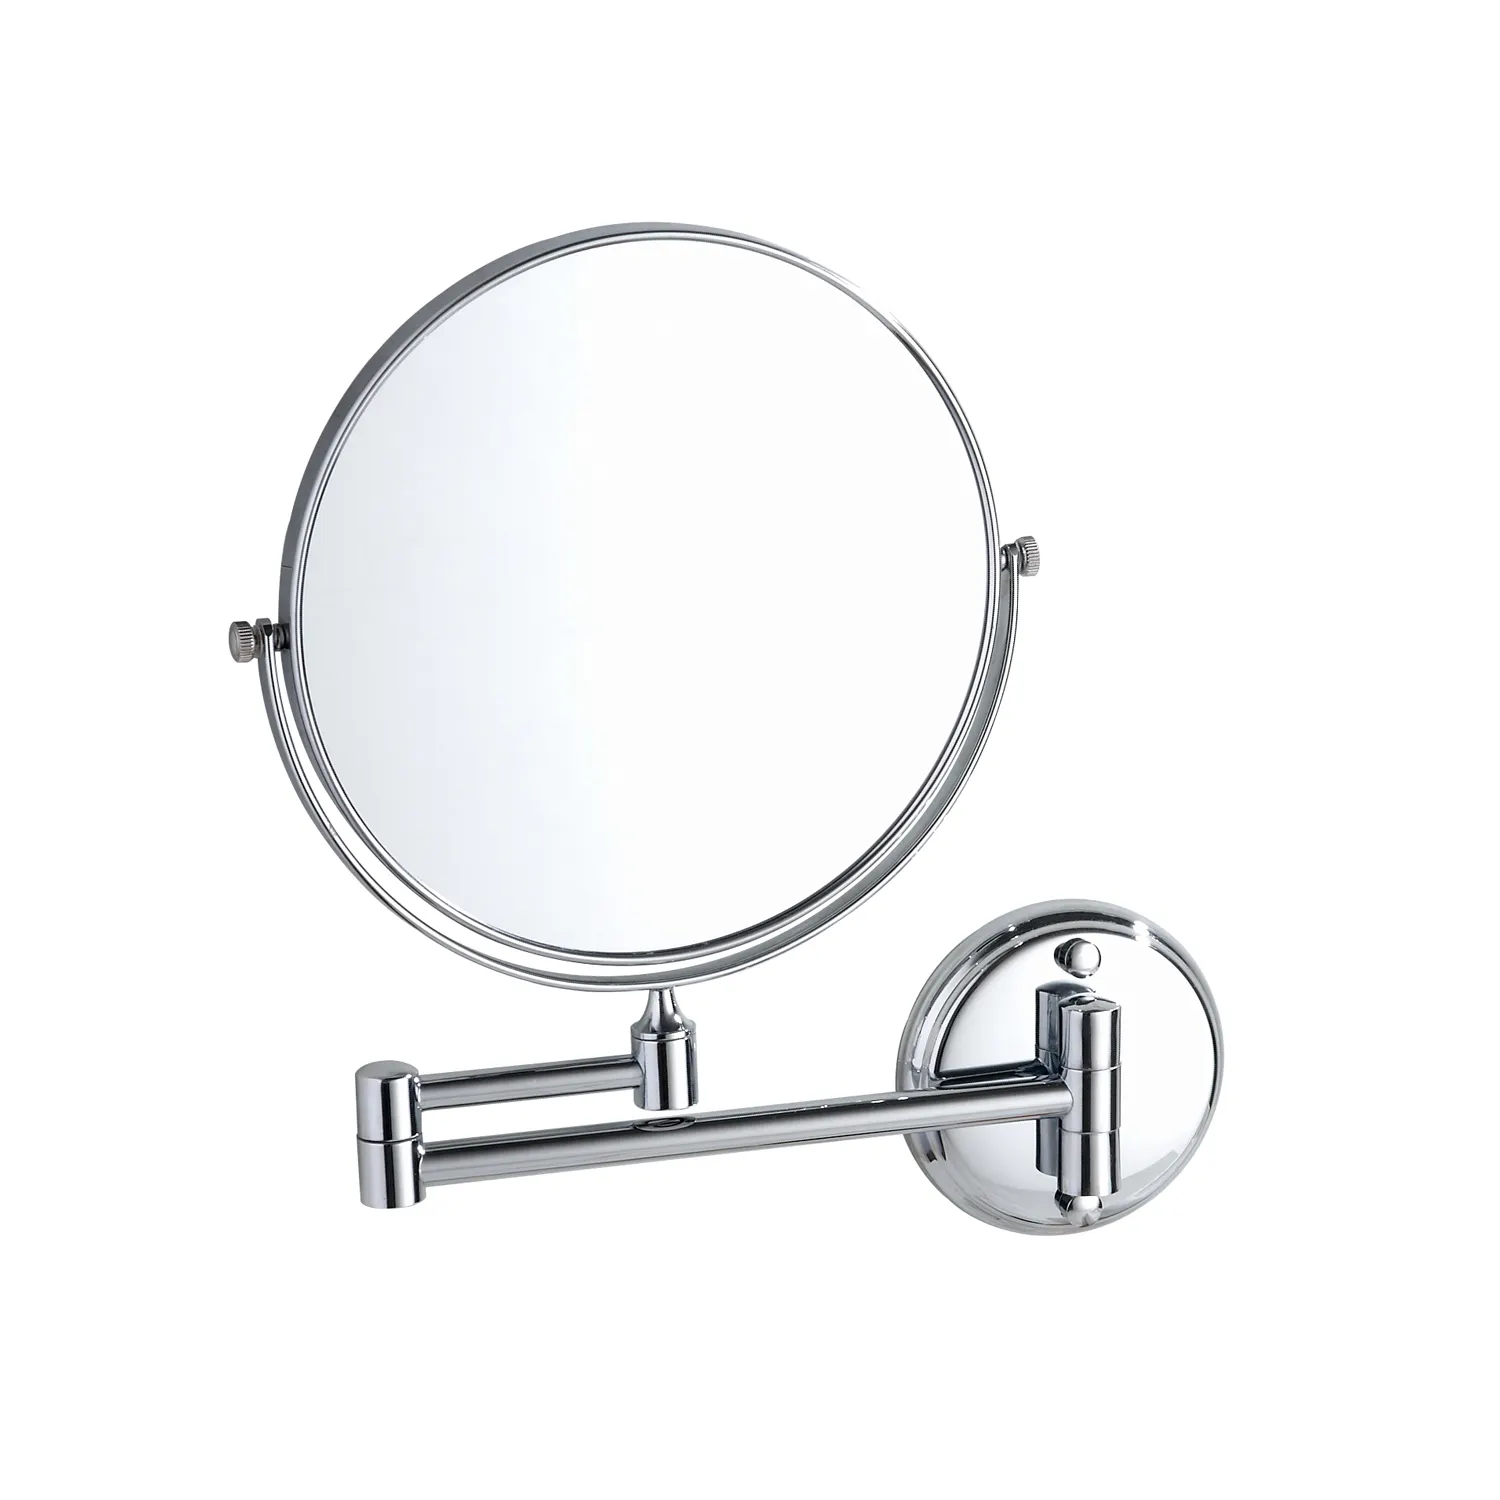 Bathroom Modern Brass Wall Mounted Round Extendable 360 Degree Rotation Cosmetic Makeup Mirror